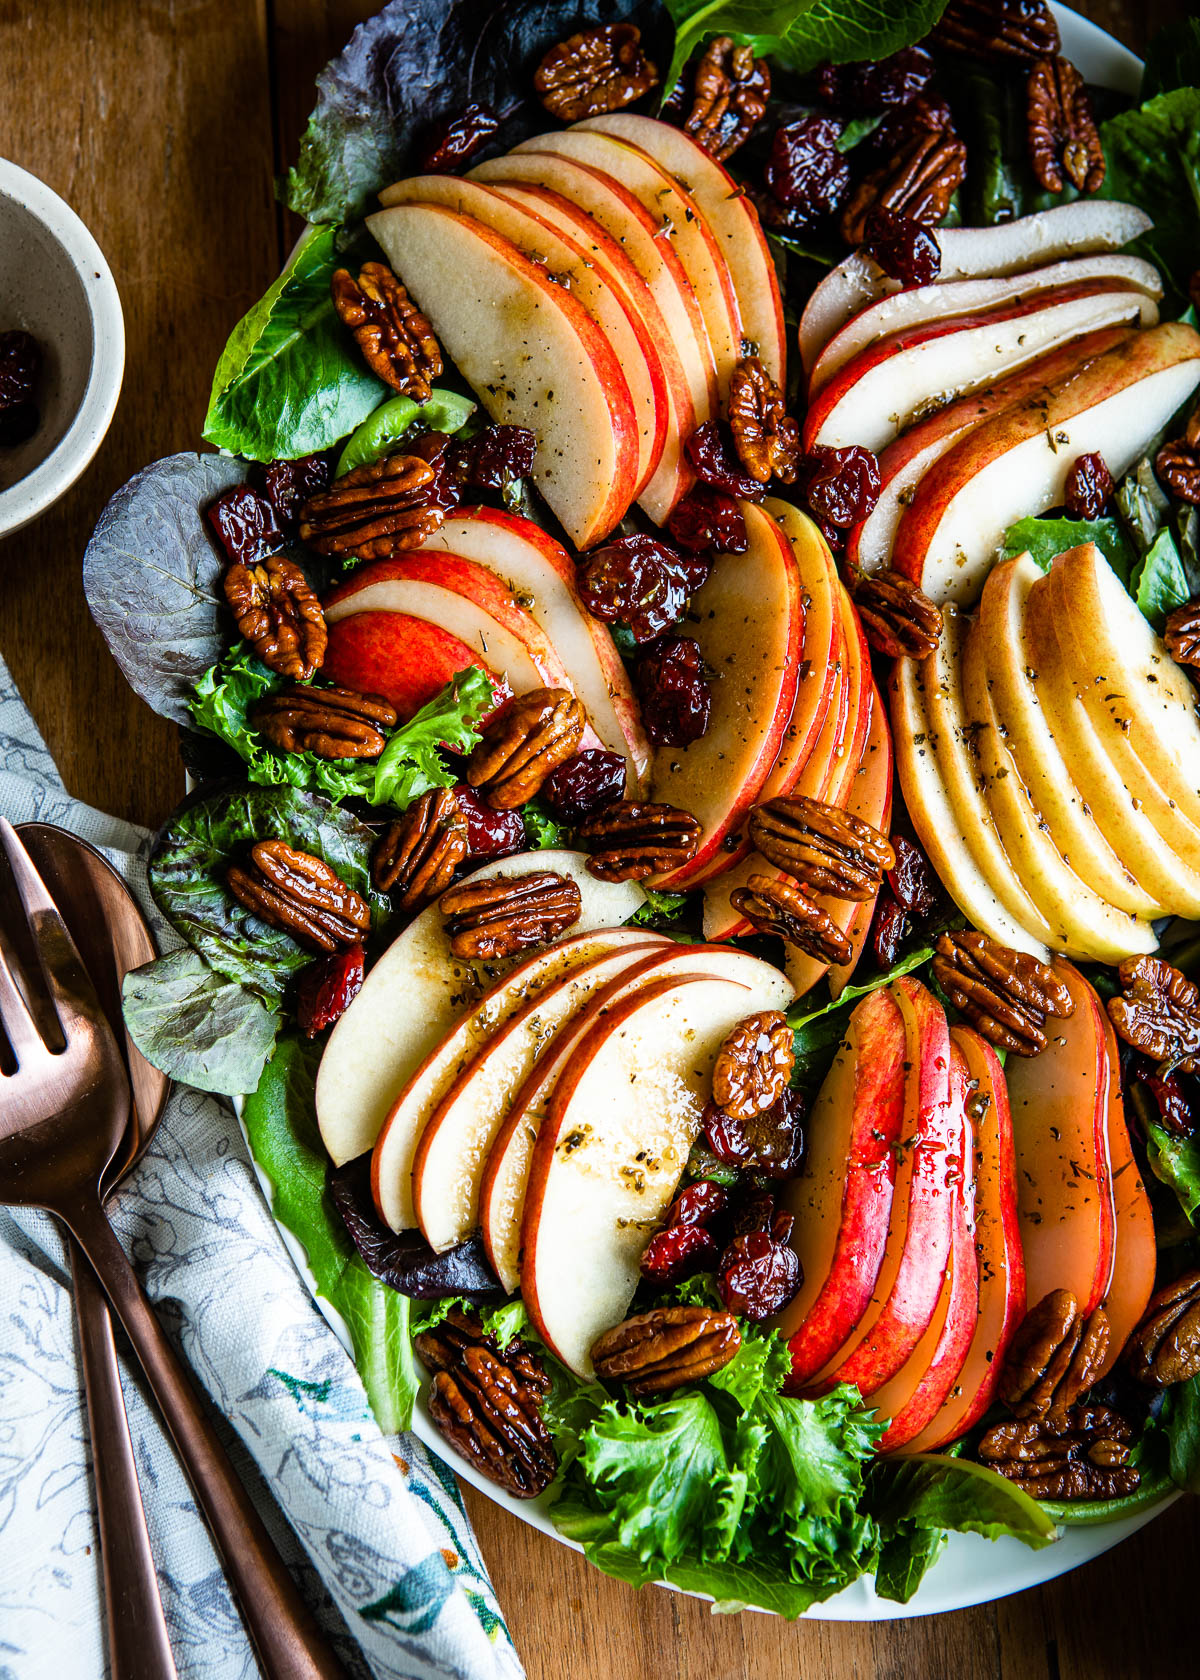 sliced apples and pears sitting on a bed of mixed greens and topped with candied pecans, vinaigrette and dried cherries.